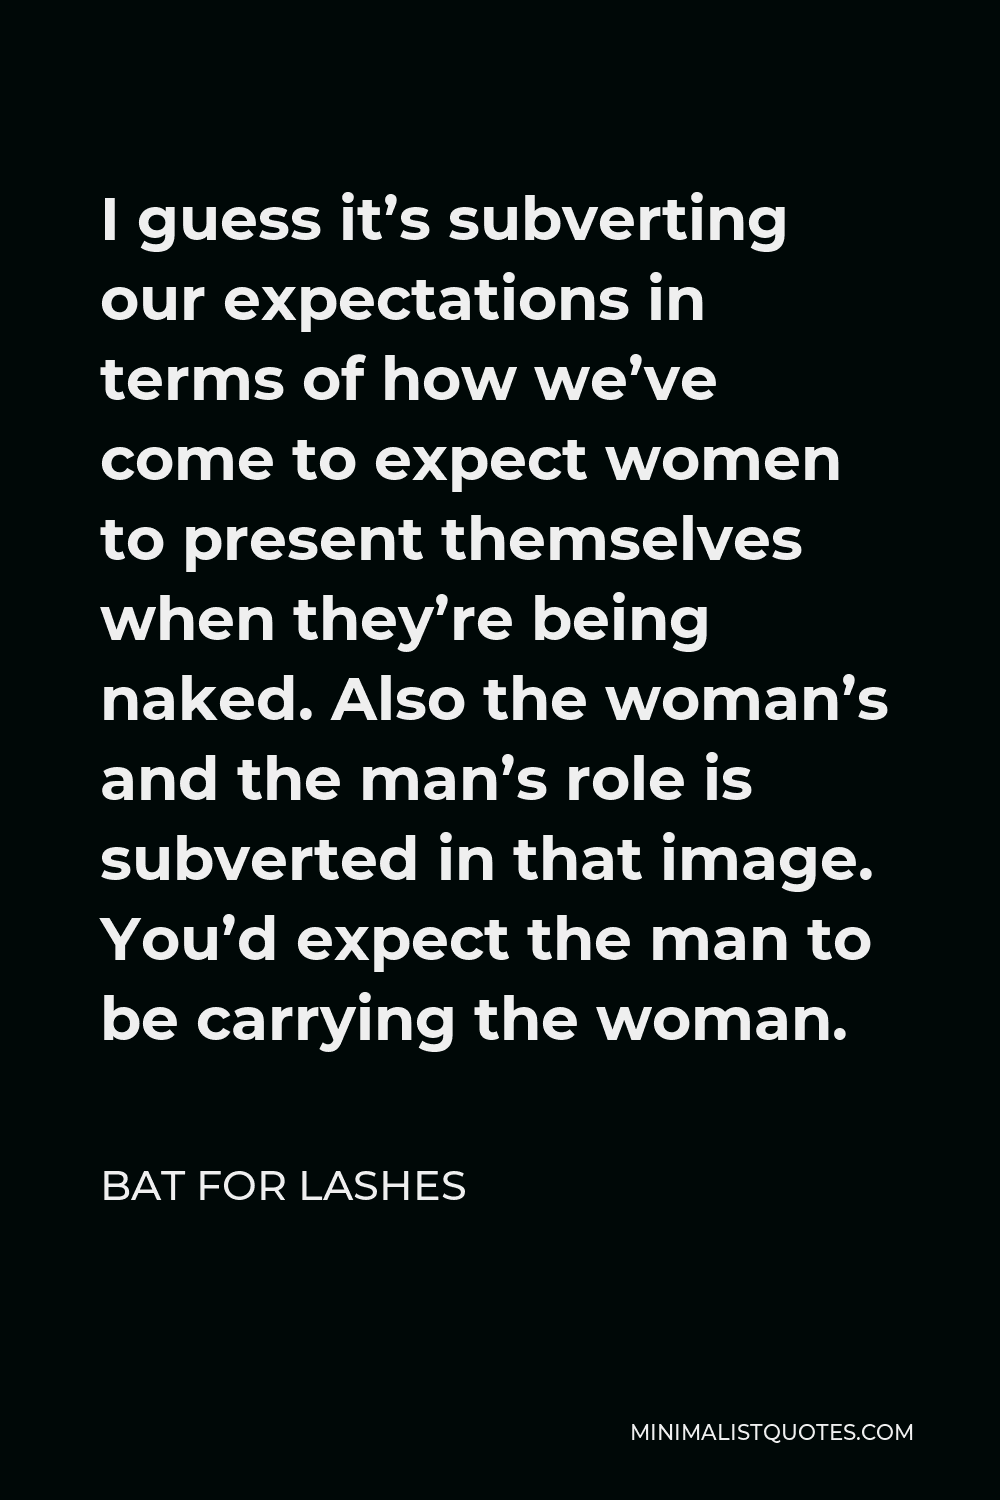 Bat for Lashes Quote - I guess it’s subverting our expectations in terms of how we’ve come to expect women to present themselves when they’re being naked. Also the woman’s and the man’s role is subverted in that image. You’d expect the man to be carrying the woman.